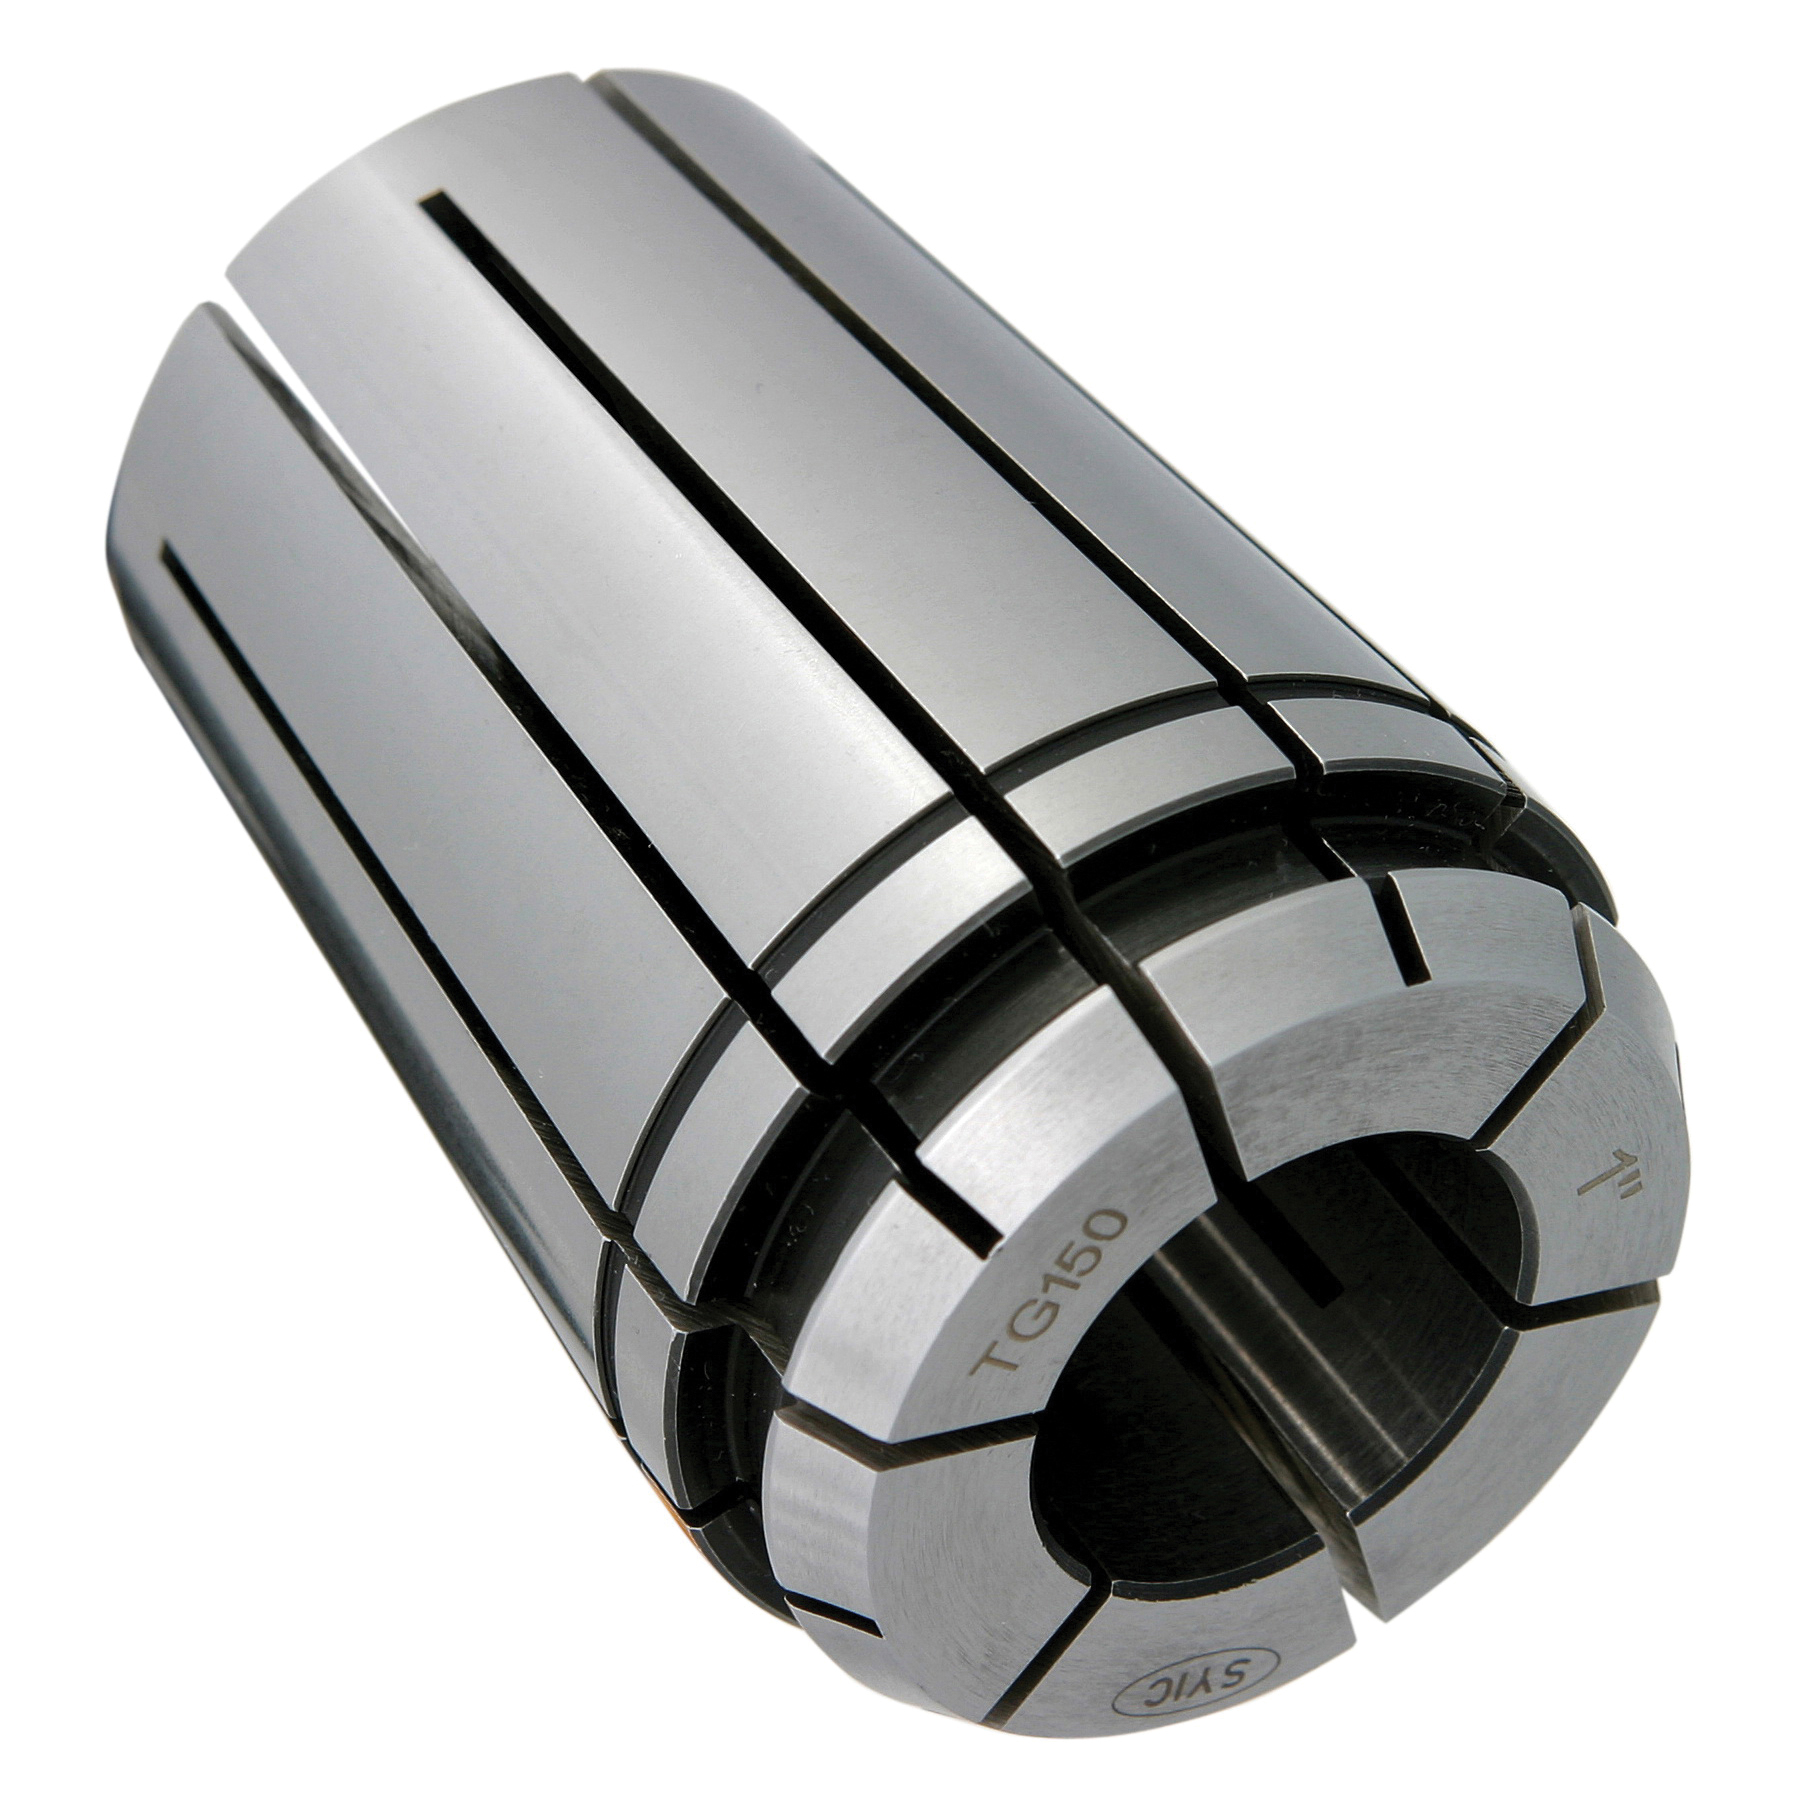 TG150 7/32" COLLET